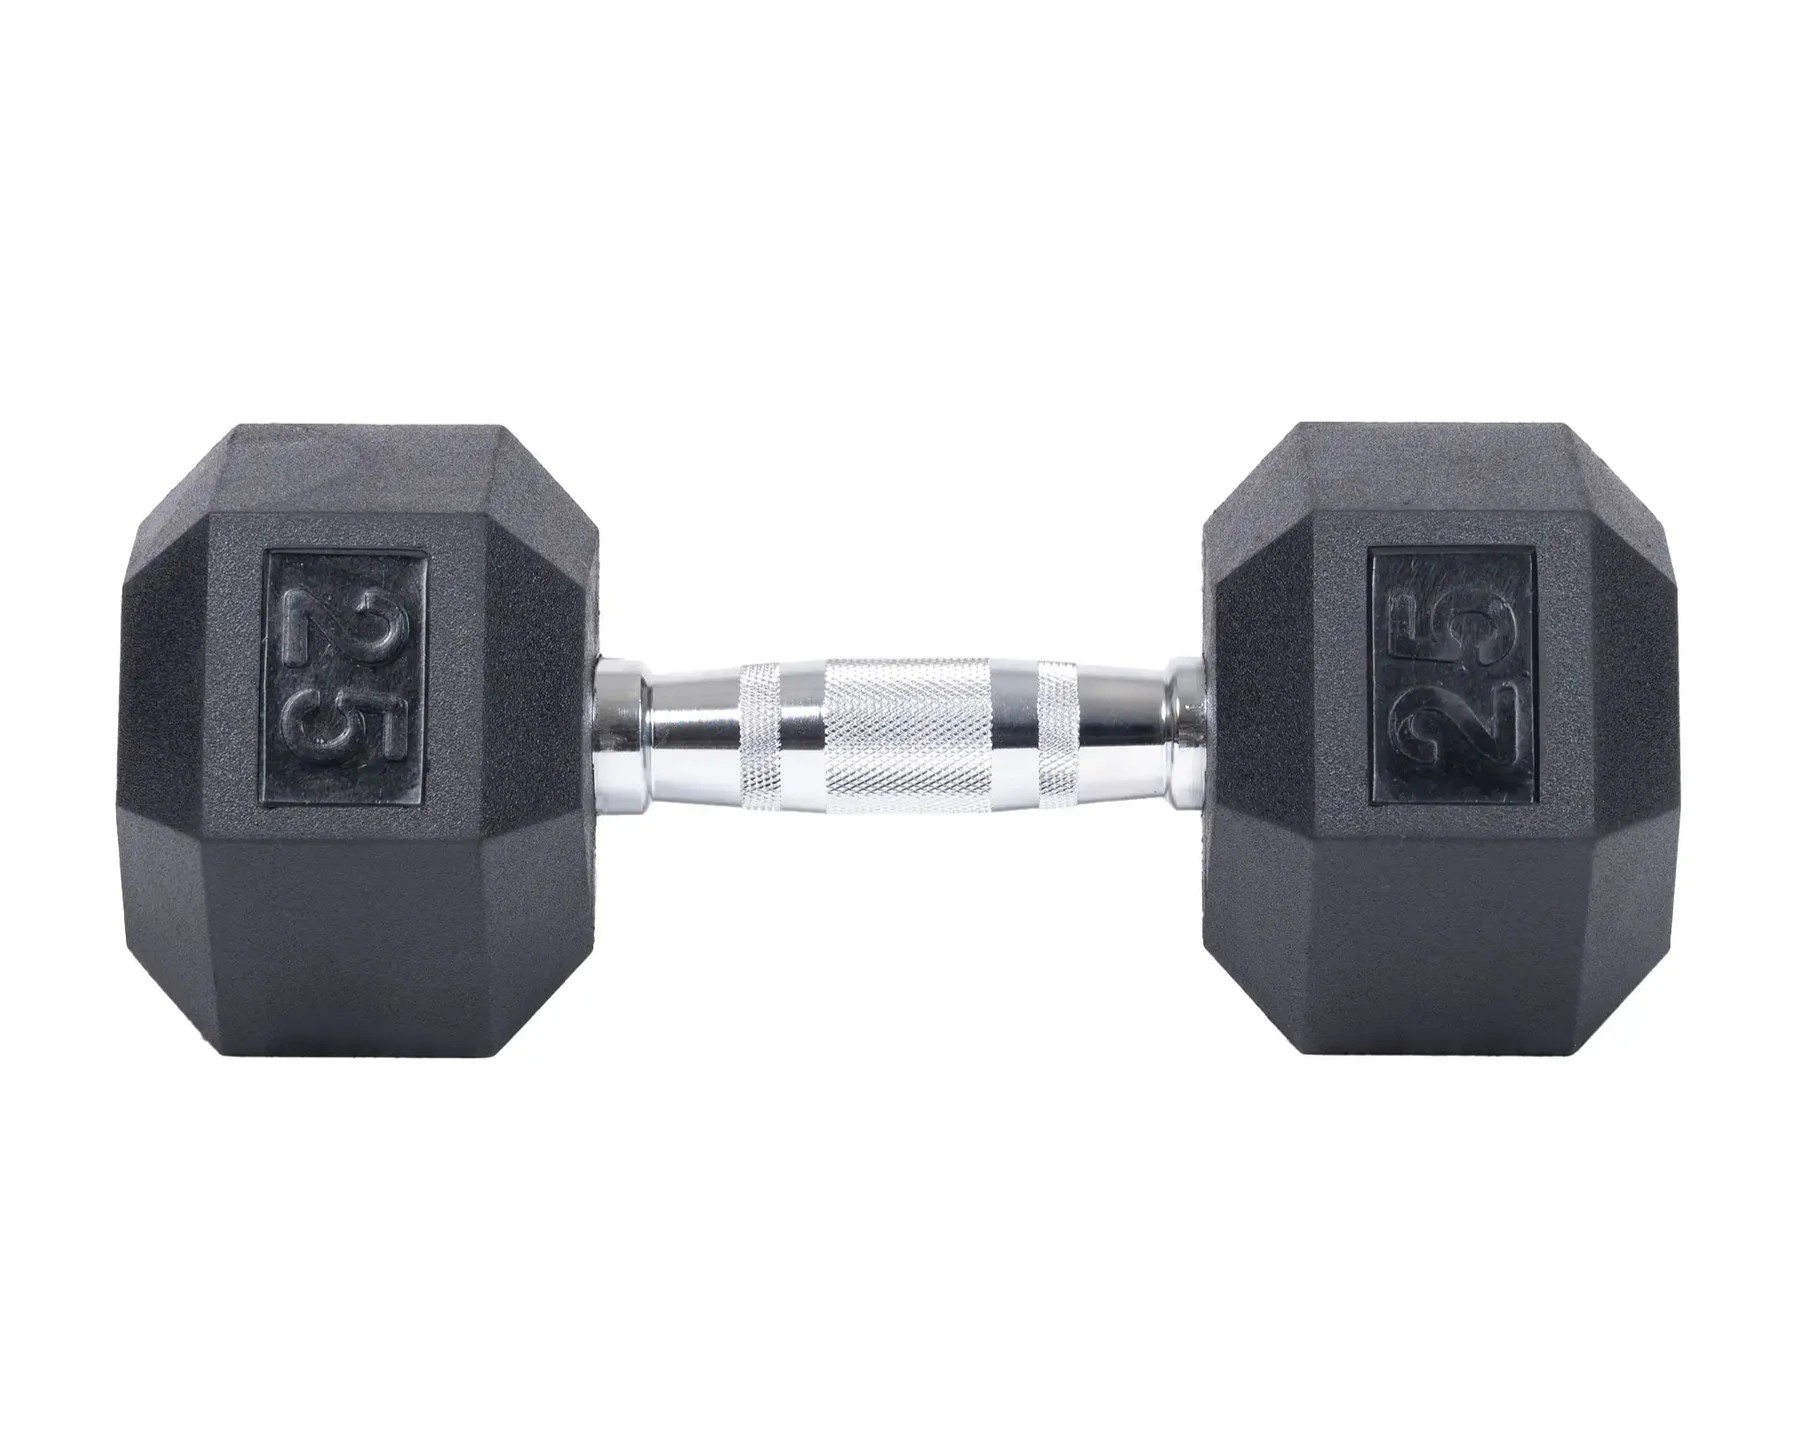 Discover The Incredible Benefits Of 25 Lbs Dumbbells!